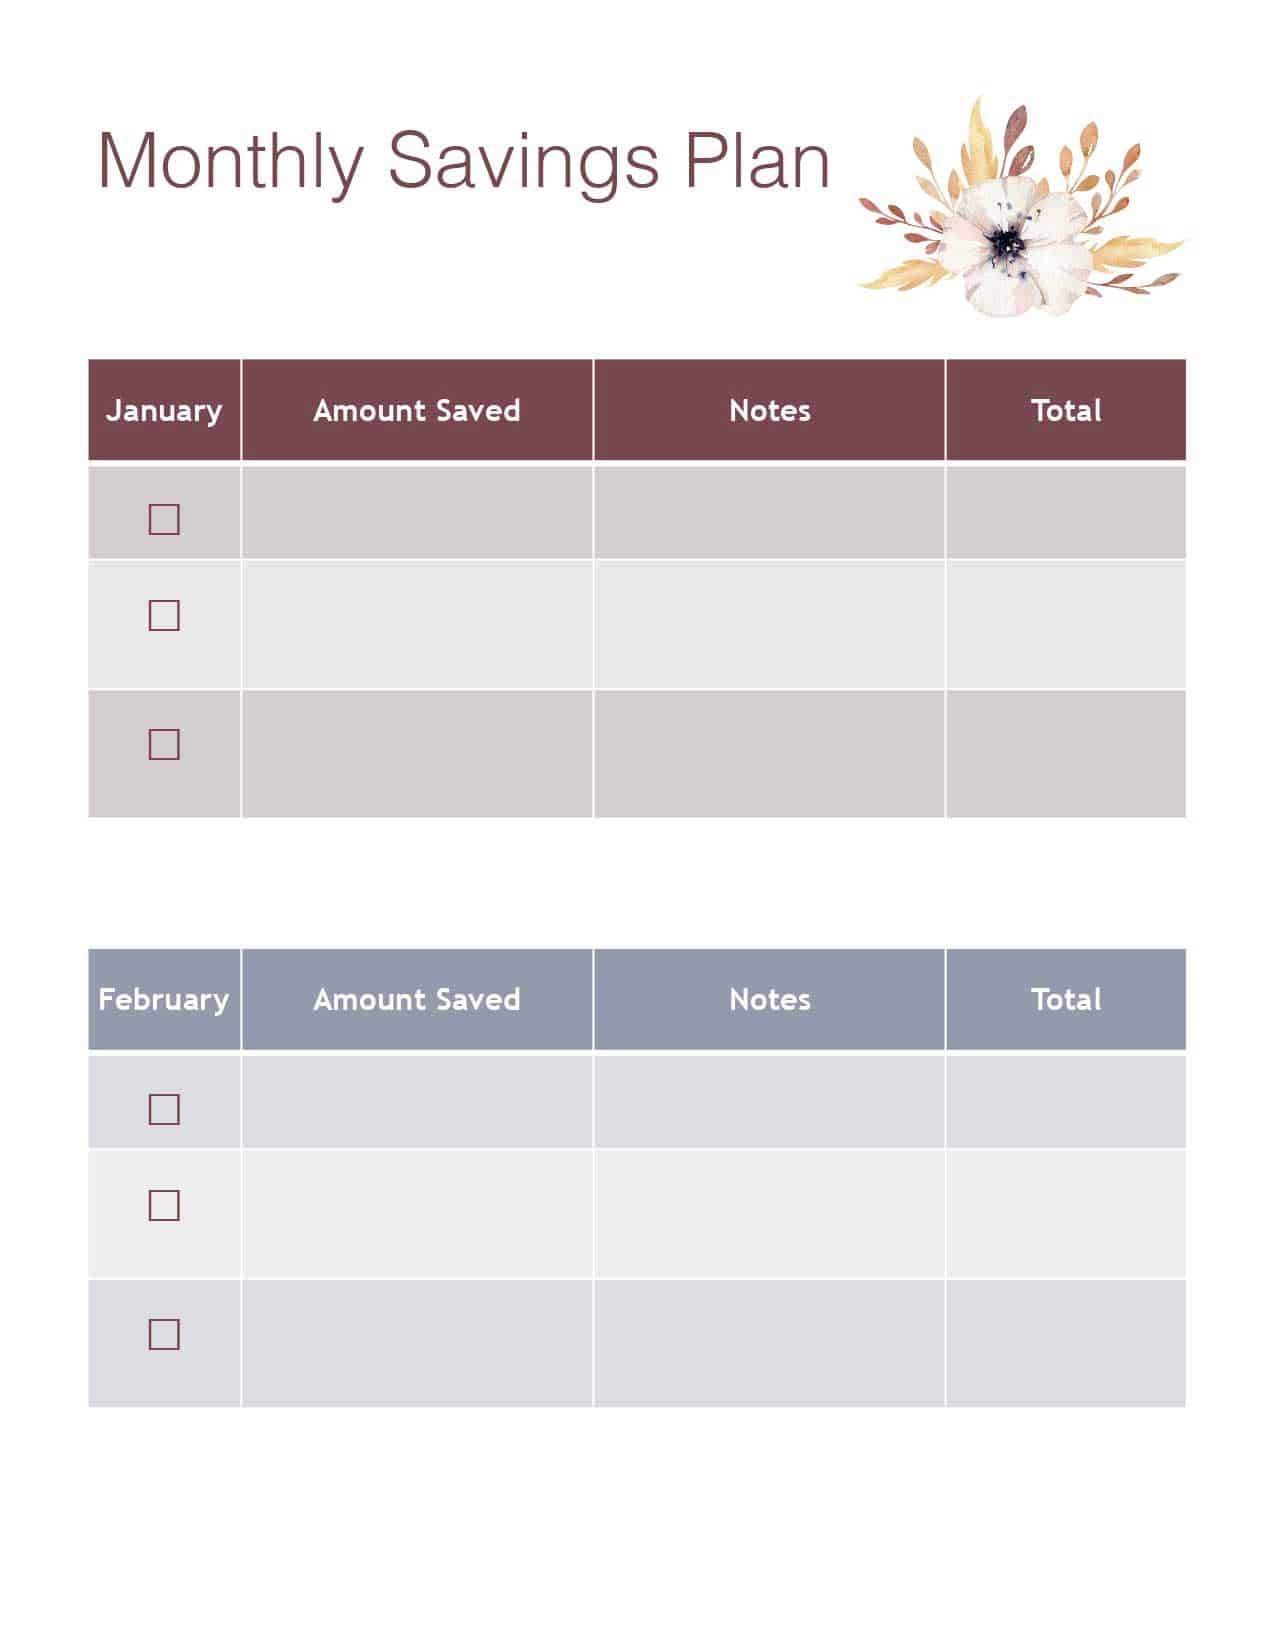 Download your free set of monthly savings plan printables